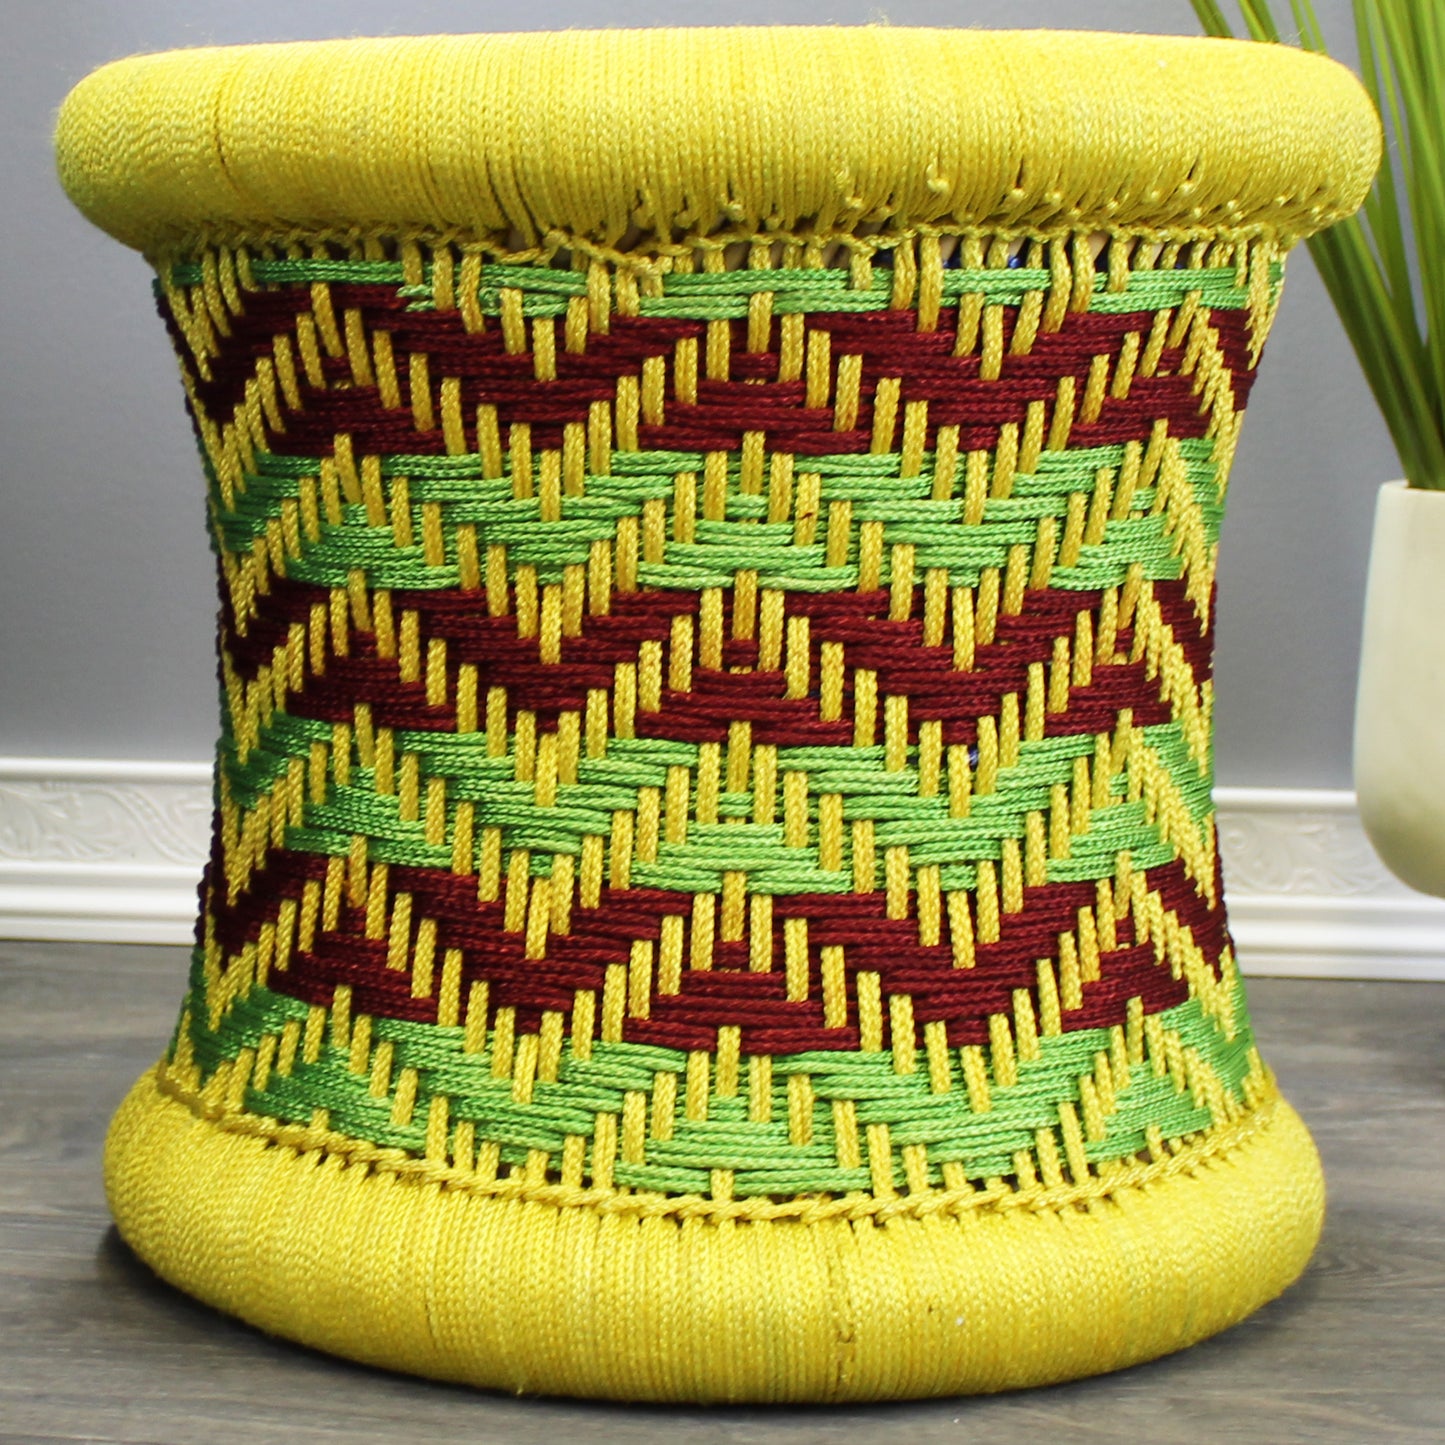 Natural Geo Decorative Handwoven Yellow/Green/Maroon Accent Stool